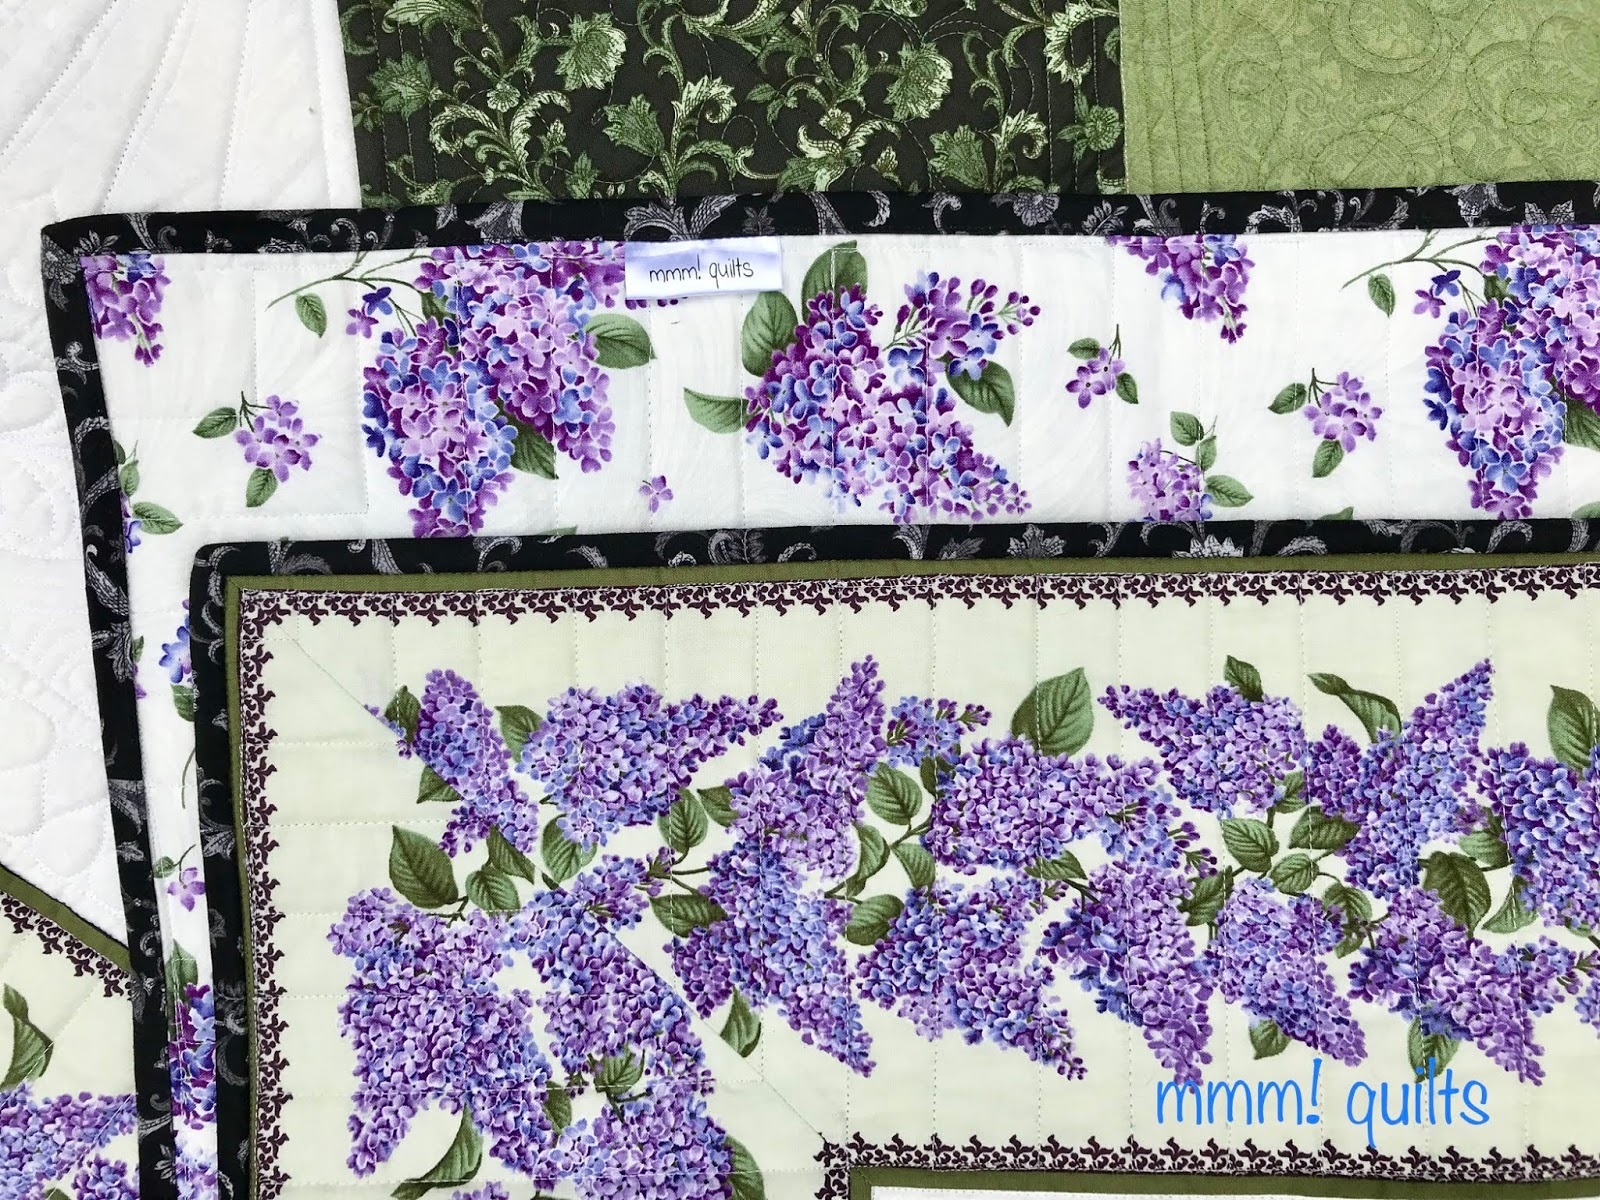 Musings of a Menopausal Melon - mmm quilts: TGIFF! and My Mother's Lilacs